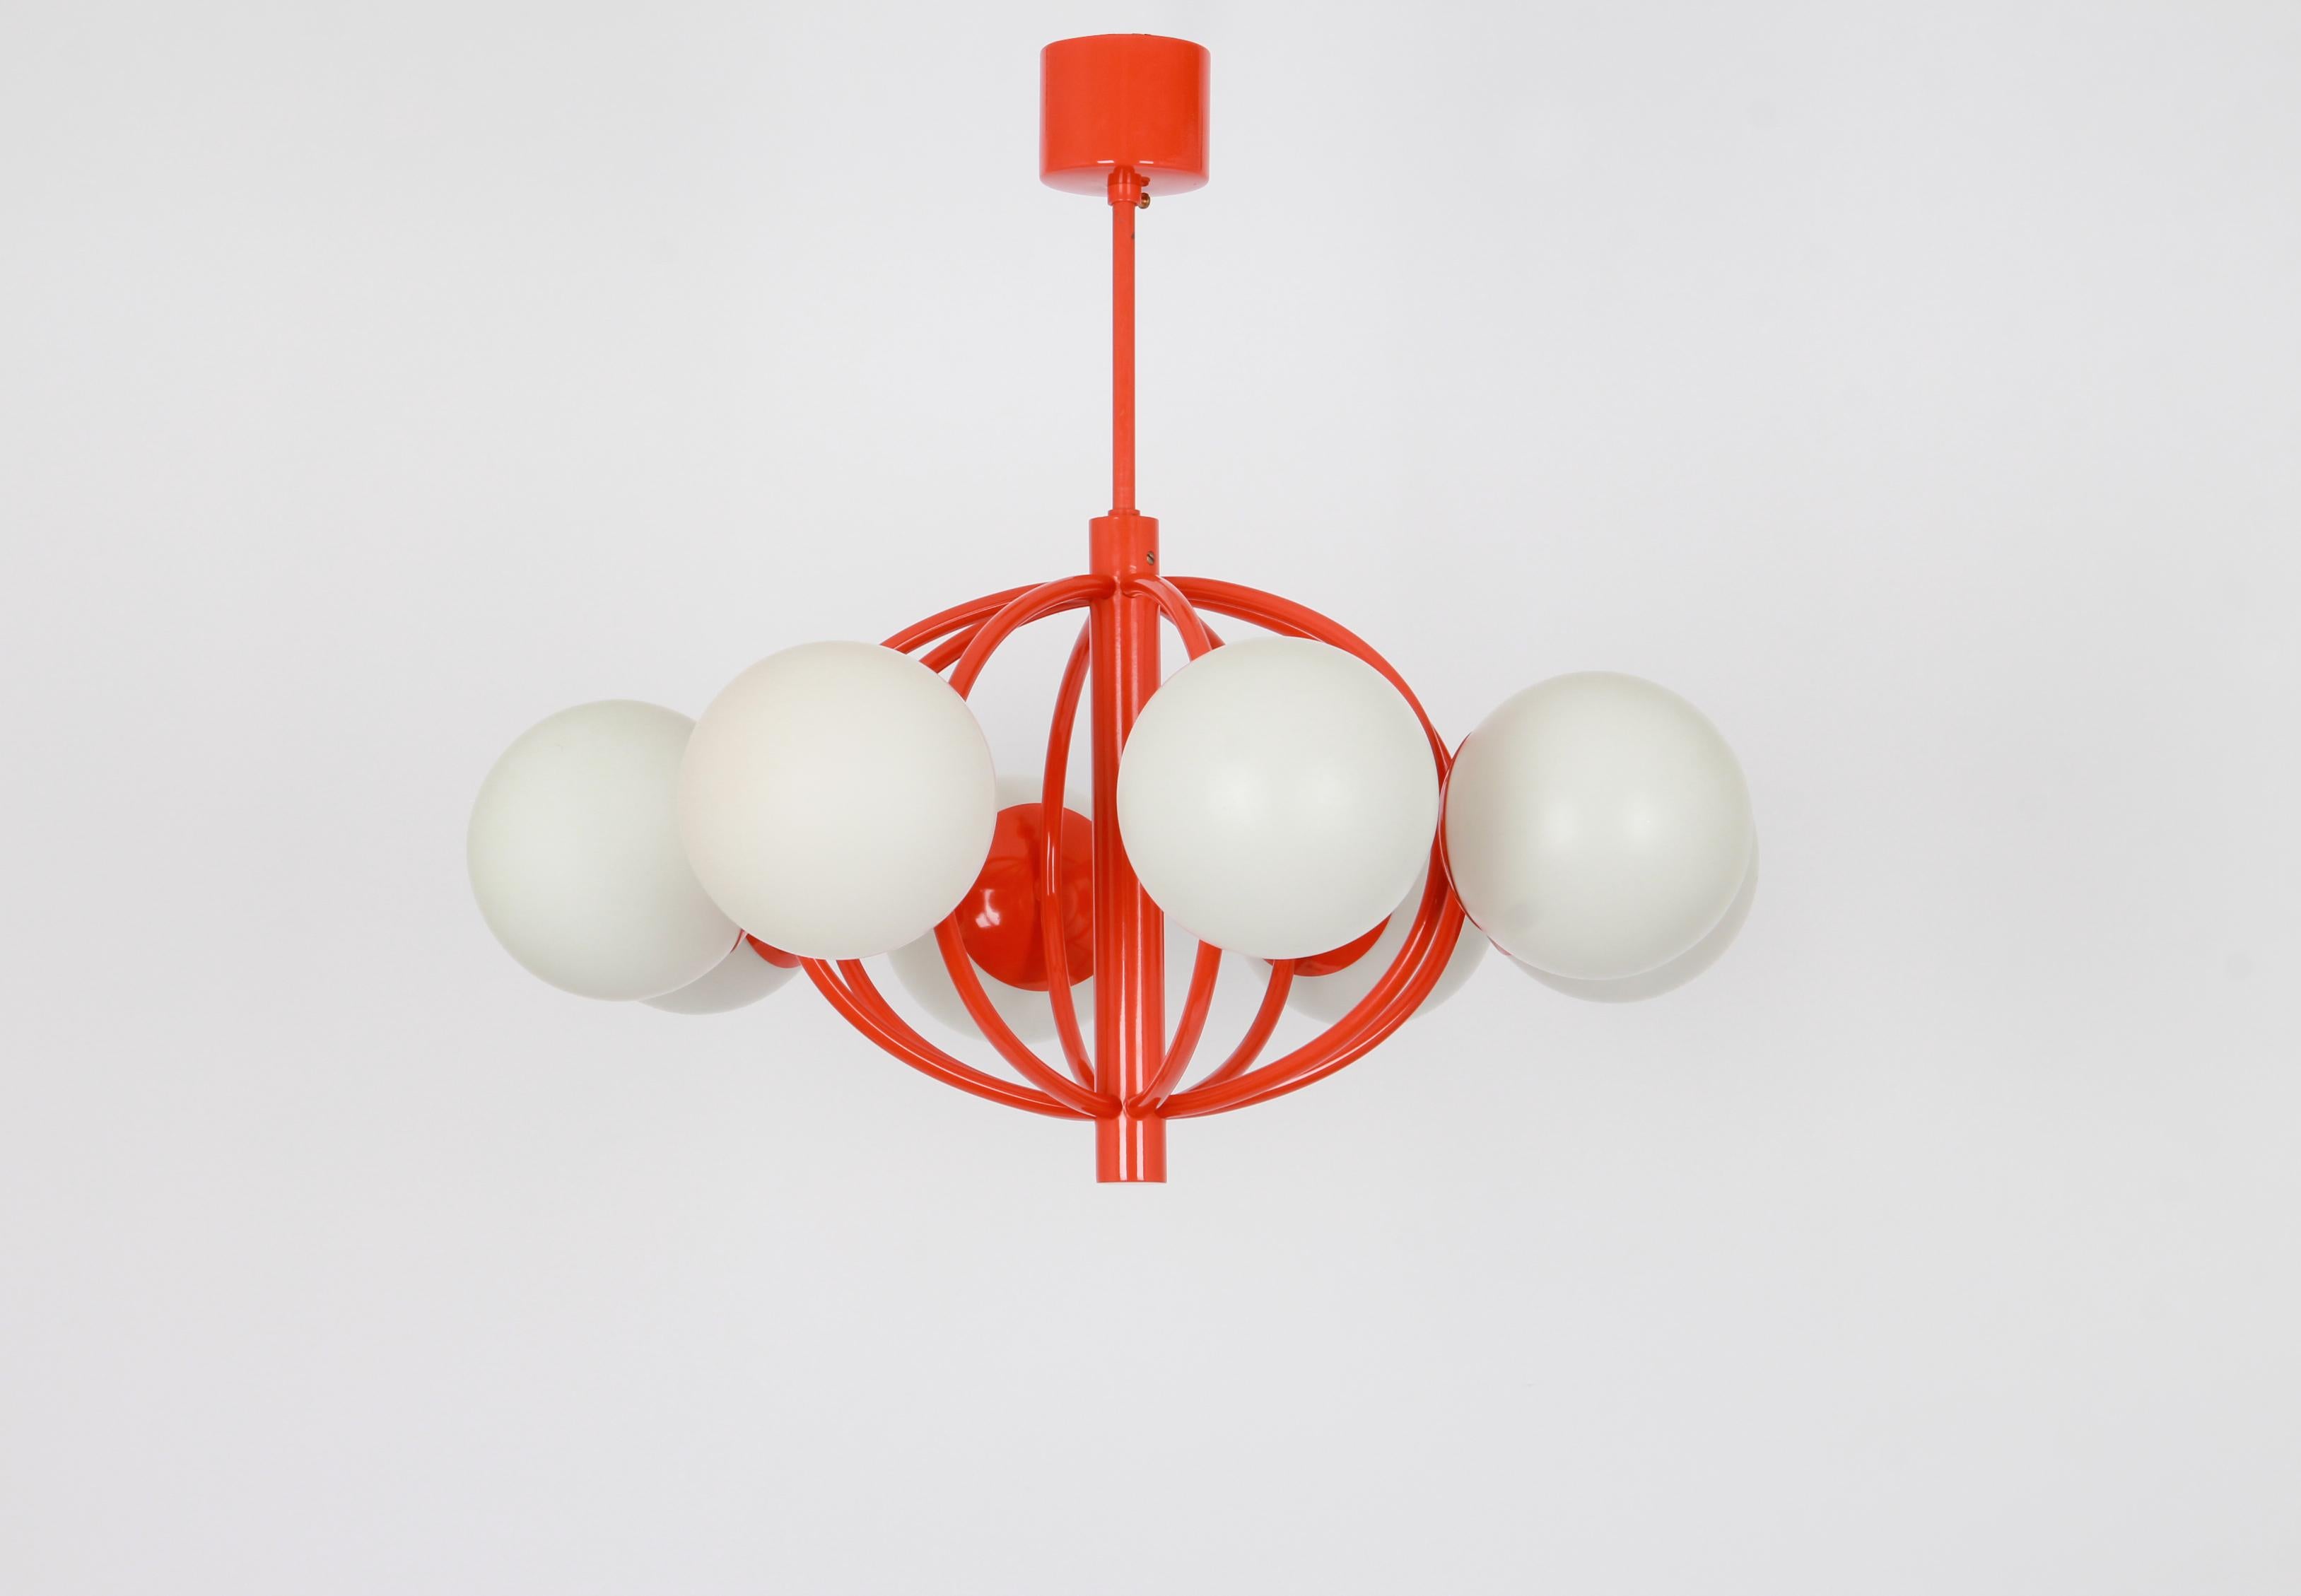 Midcentury vintage pendant in orange color made by Kaiser Leuchten, Germany with 8 opal glass balls.
High quality and in very good condition. Cleaned, well-wired and ready to use. 

The fixture requires 8 x E14 small bulbs with 40W max